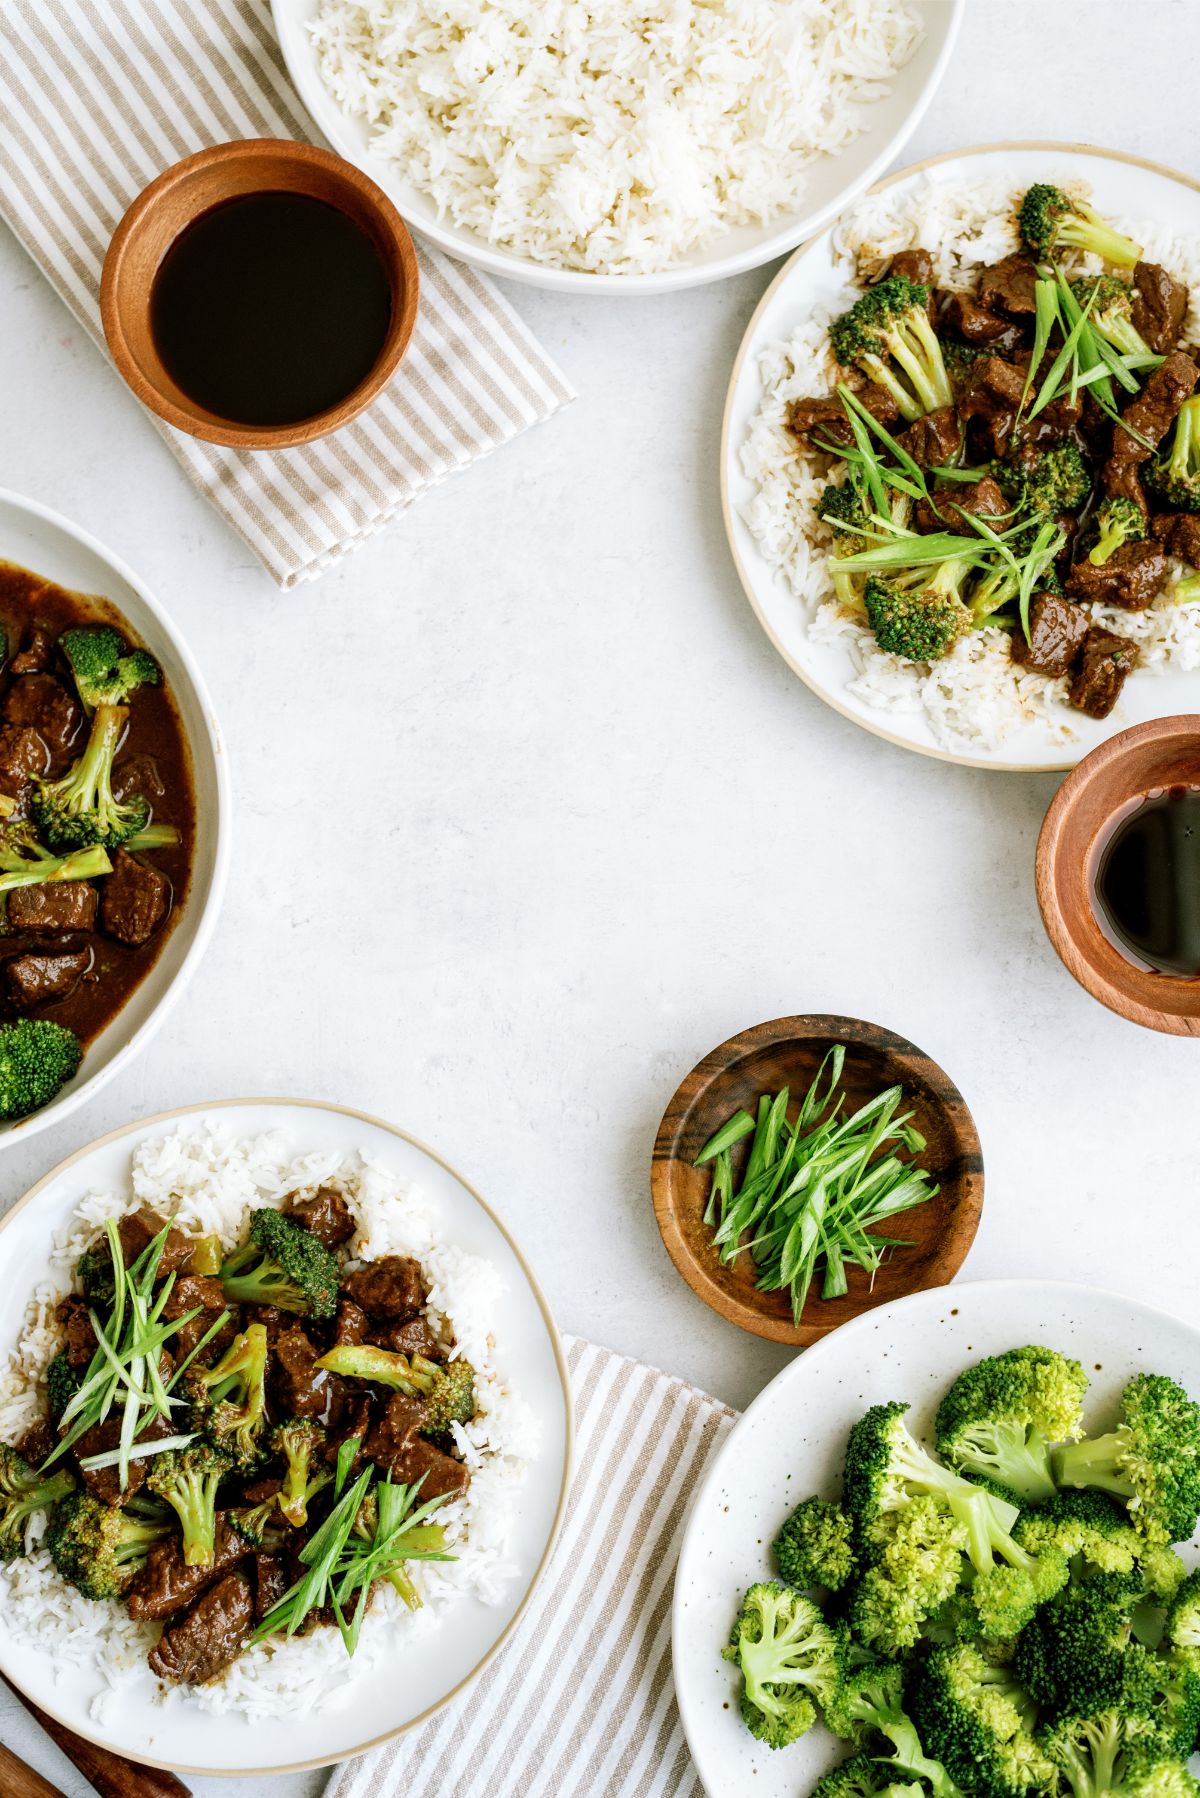 Plates of Instant Pot Beef and Broccoli, Rice, broccoli and soy sauce